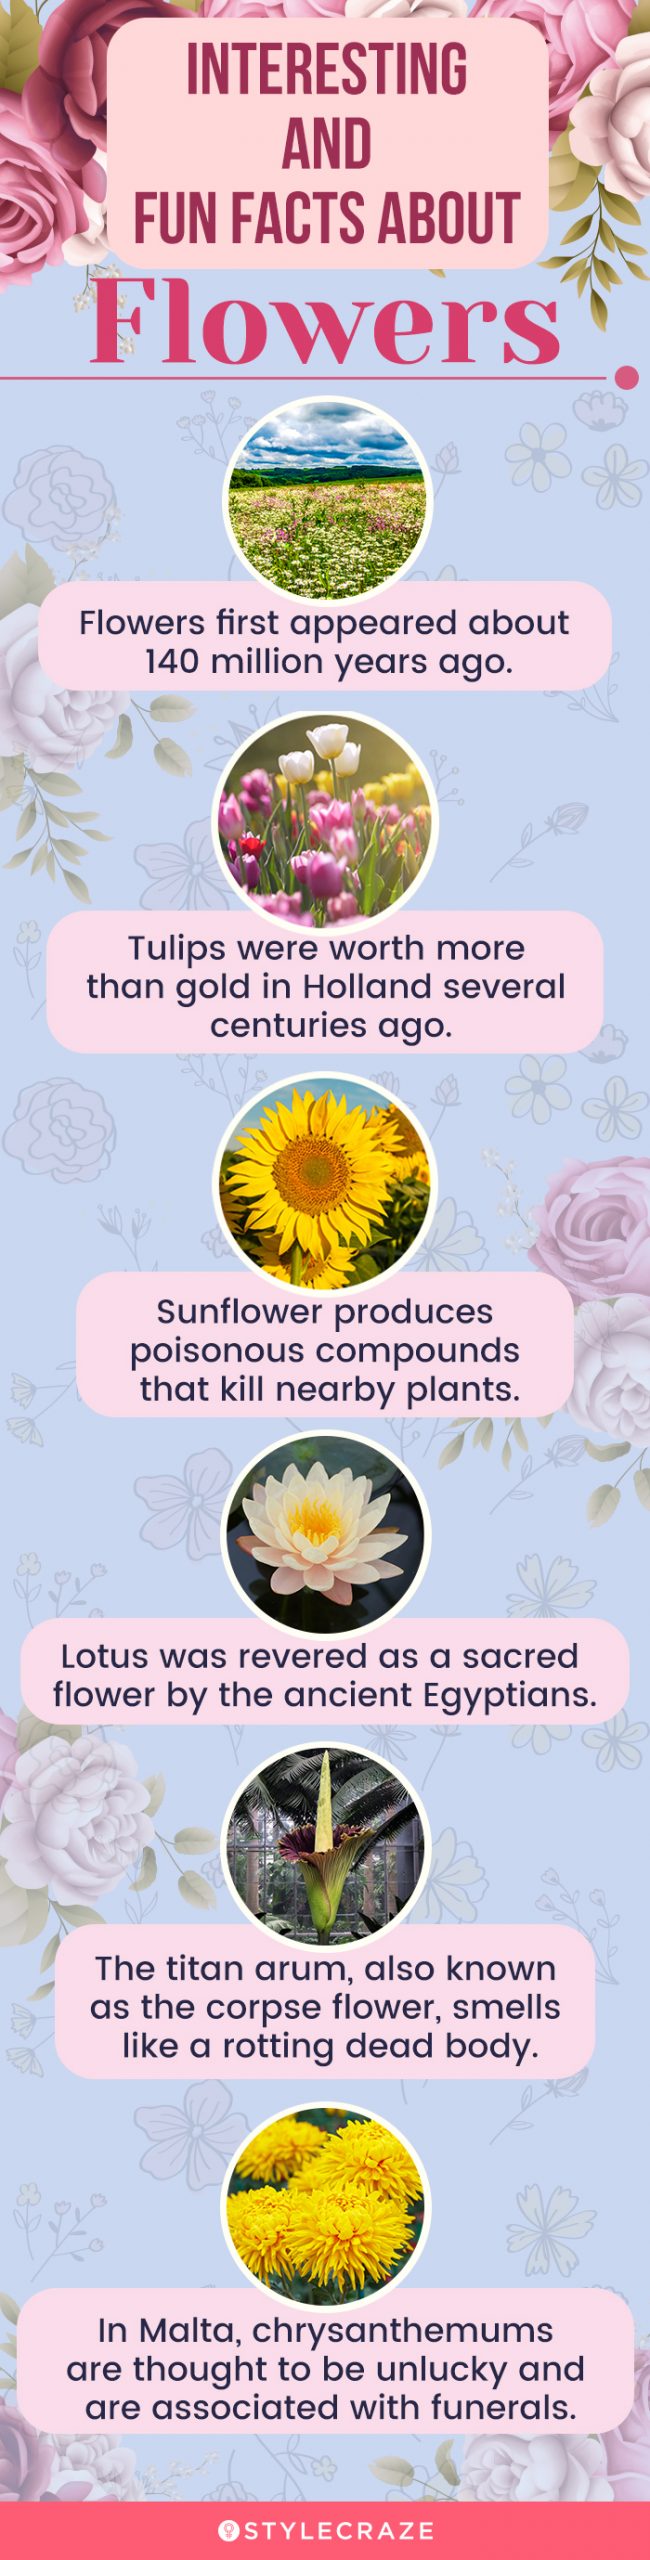 interesting and fun facts about flowers (infographic)